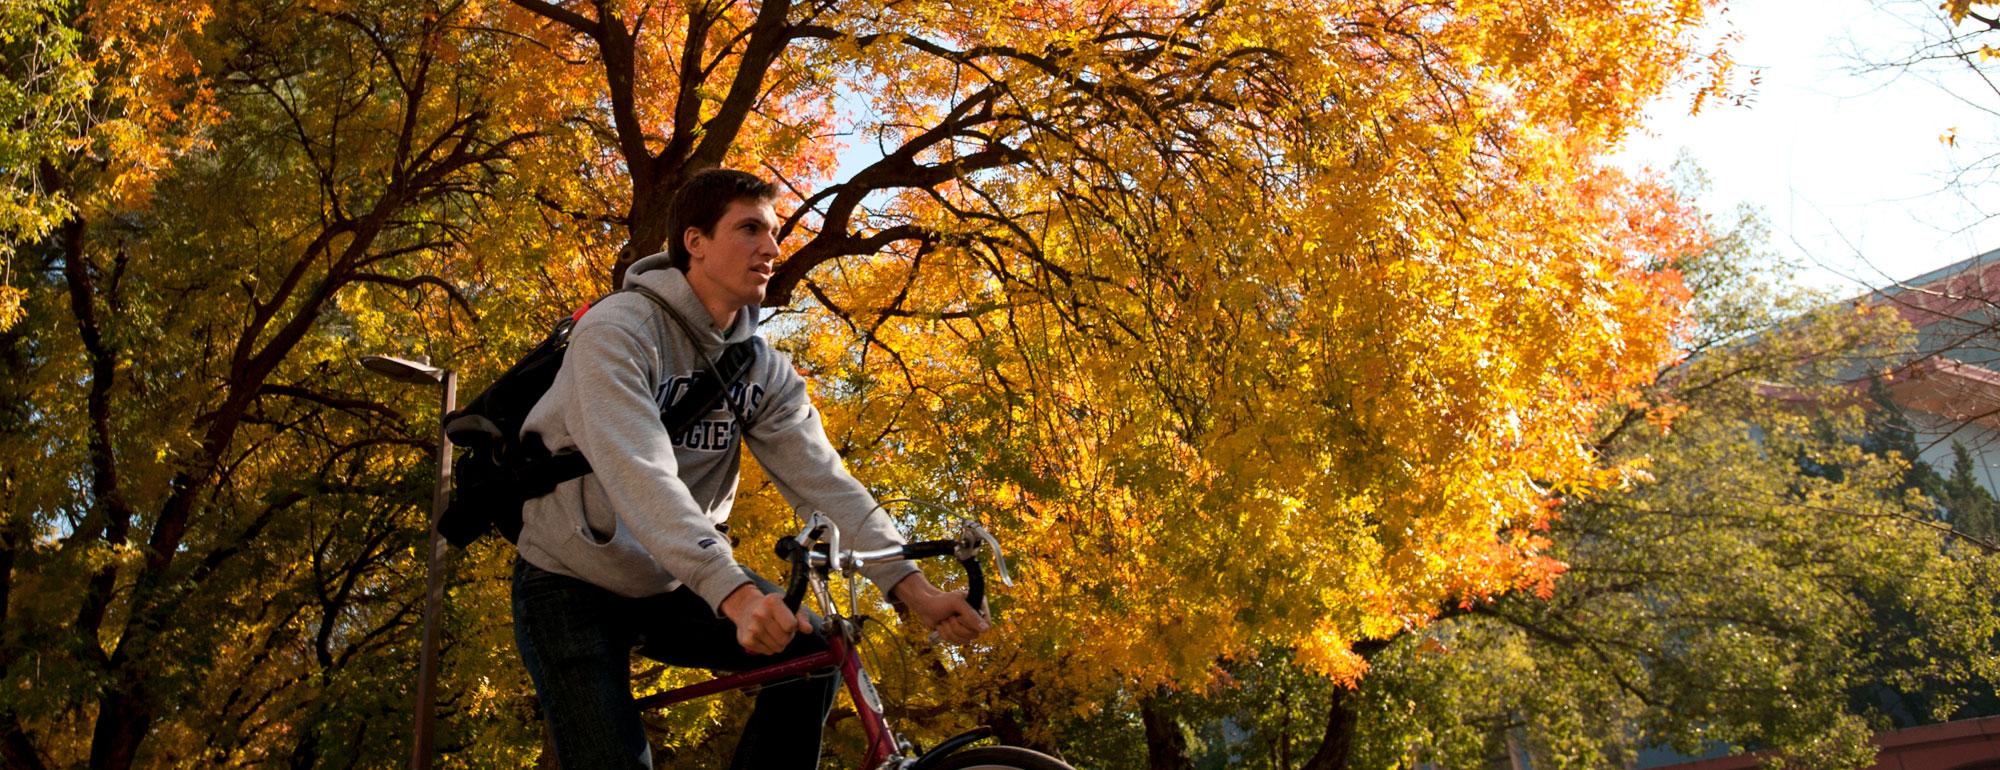 A male student rides his bicycle under the Fall foliage on the ˽̳ Davis campus